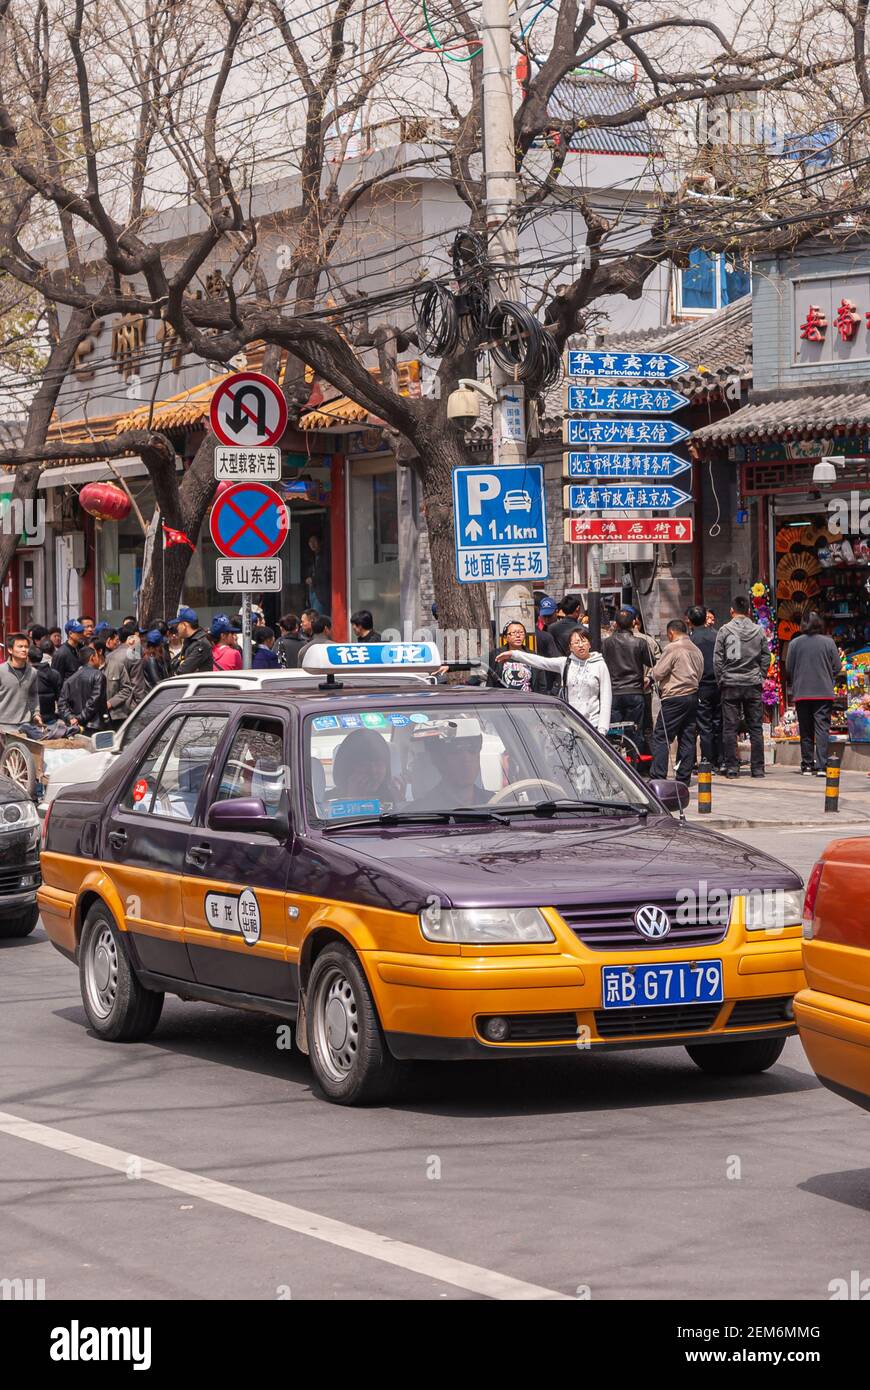 Beijing, China - April 27, 2010: Street scene with purple-orange Volkswagen taxi car stuck in traffic. Sings, stores, and plenty of people. Leaf-less Stock Photo